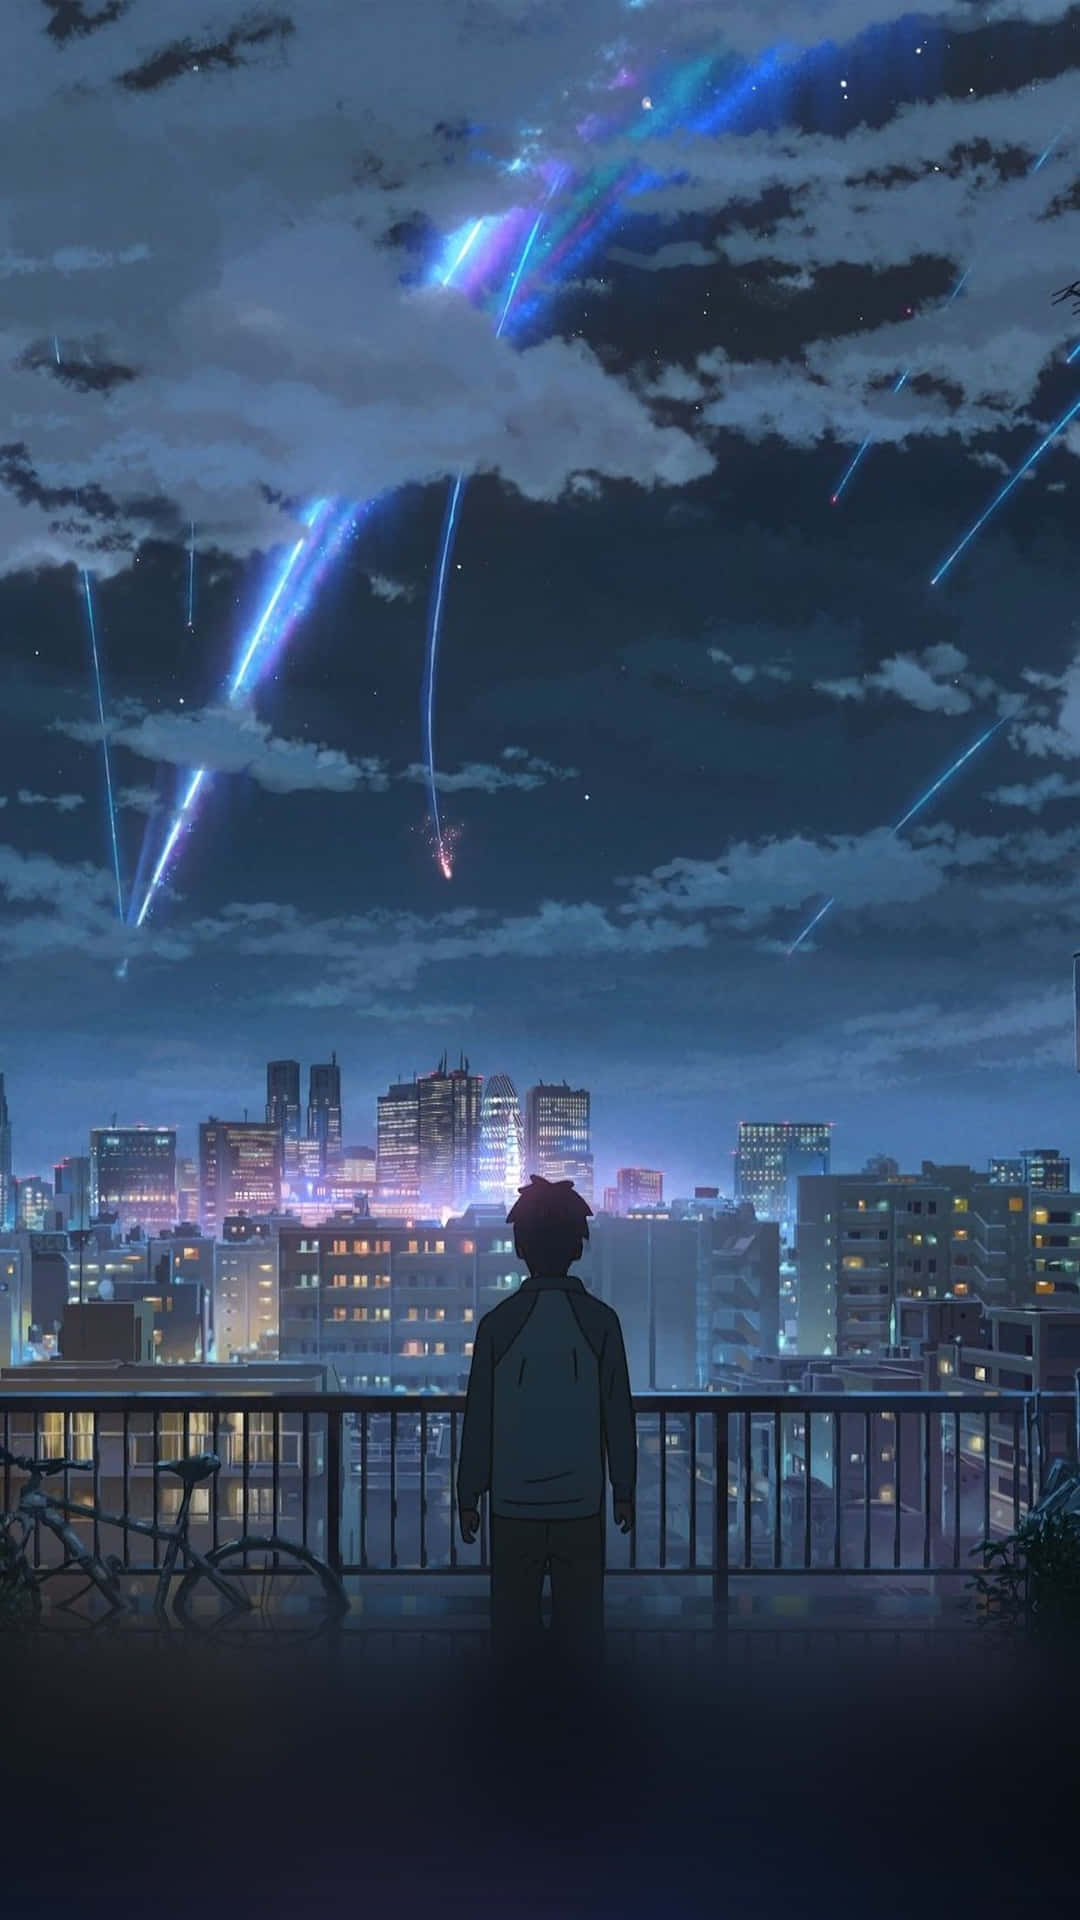 2016 Your Name Anime Building Wallpaper